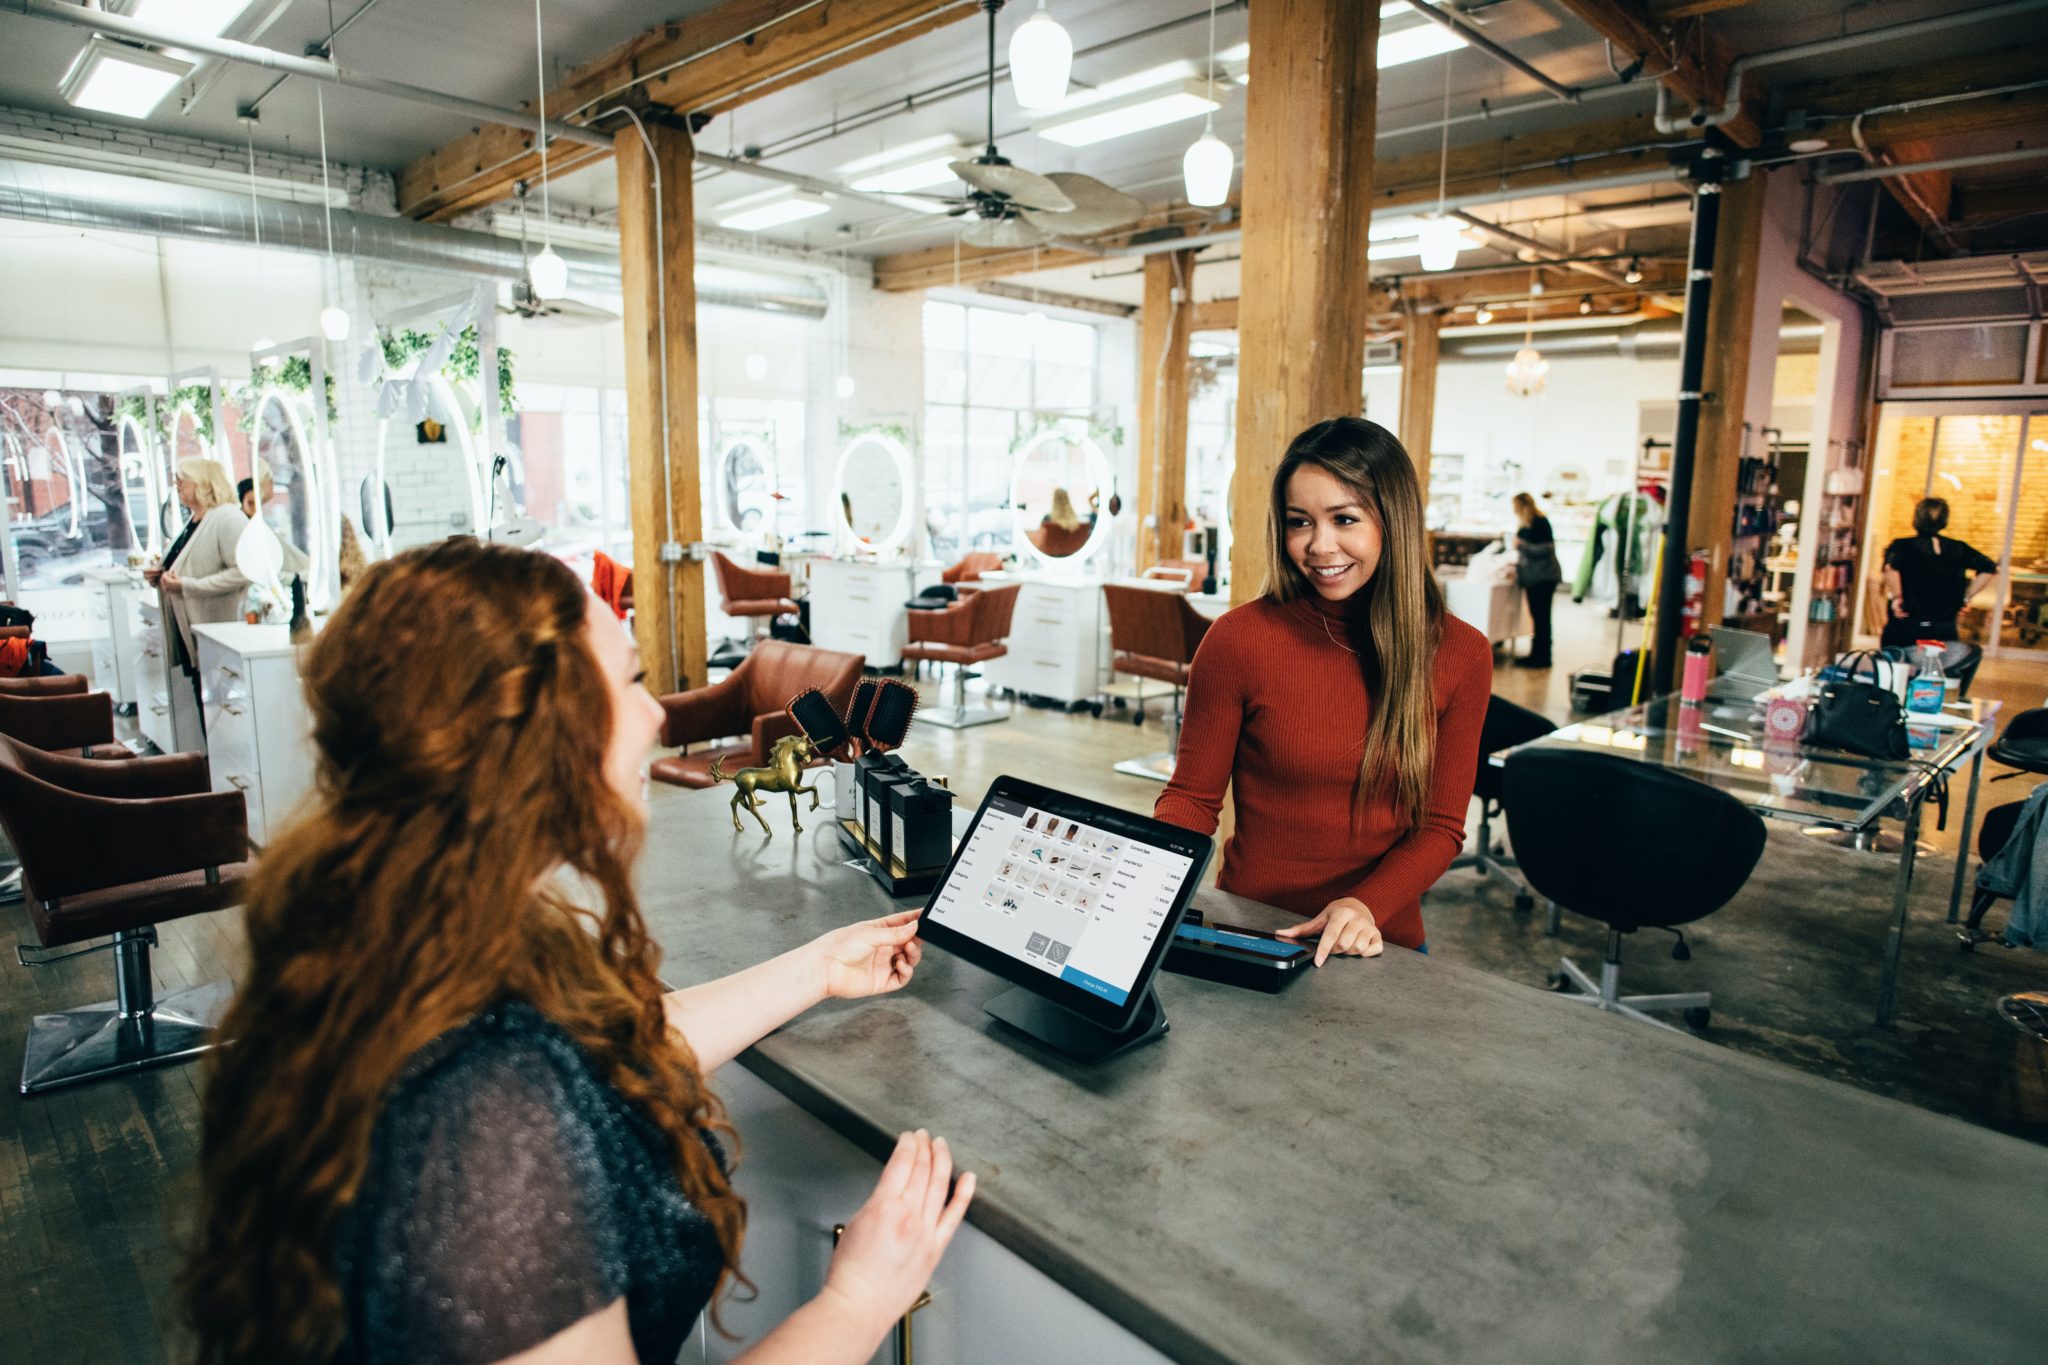 Woman using point-of-sales system to pay small business owner. Photo by Blake Wisz on Unsplash.